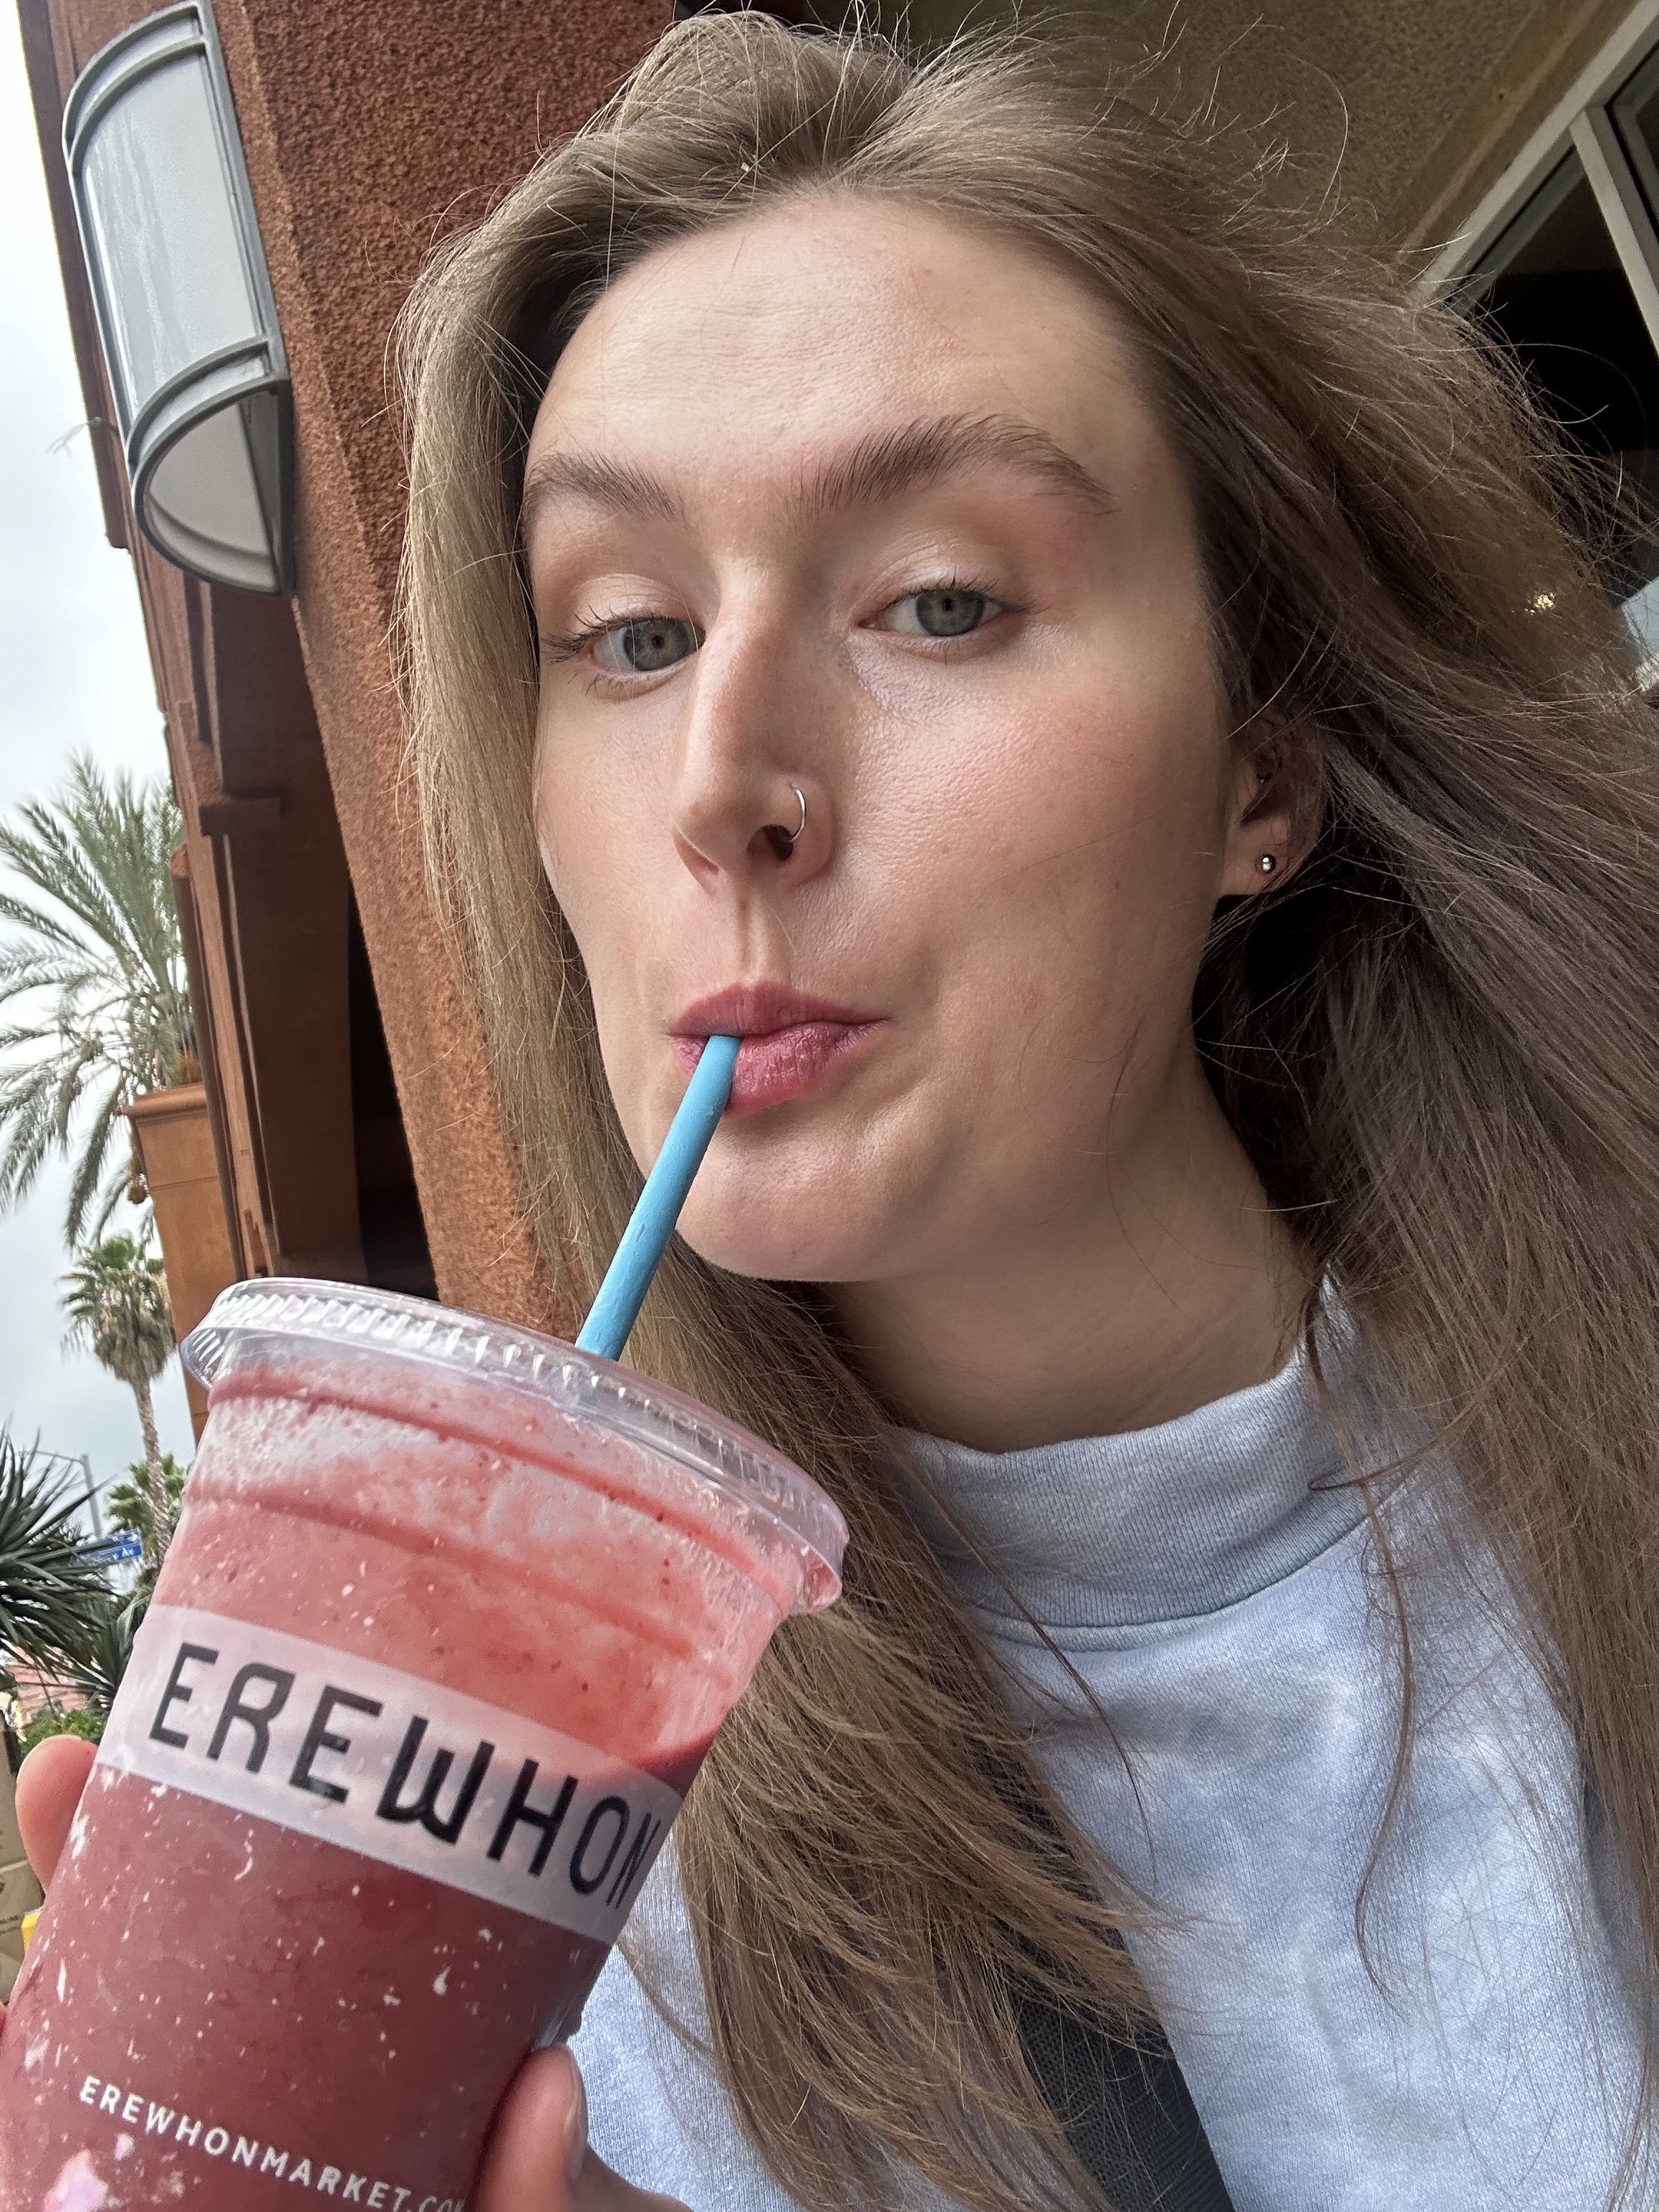 author sipping the smoothie